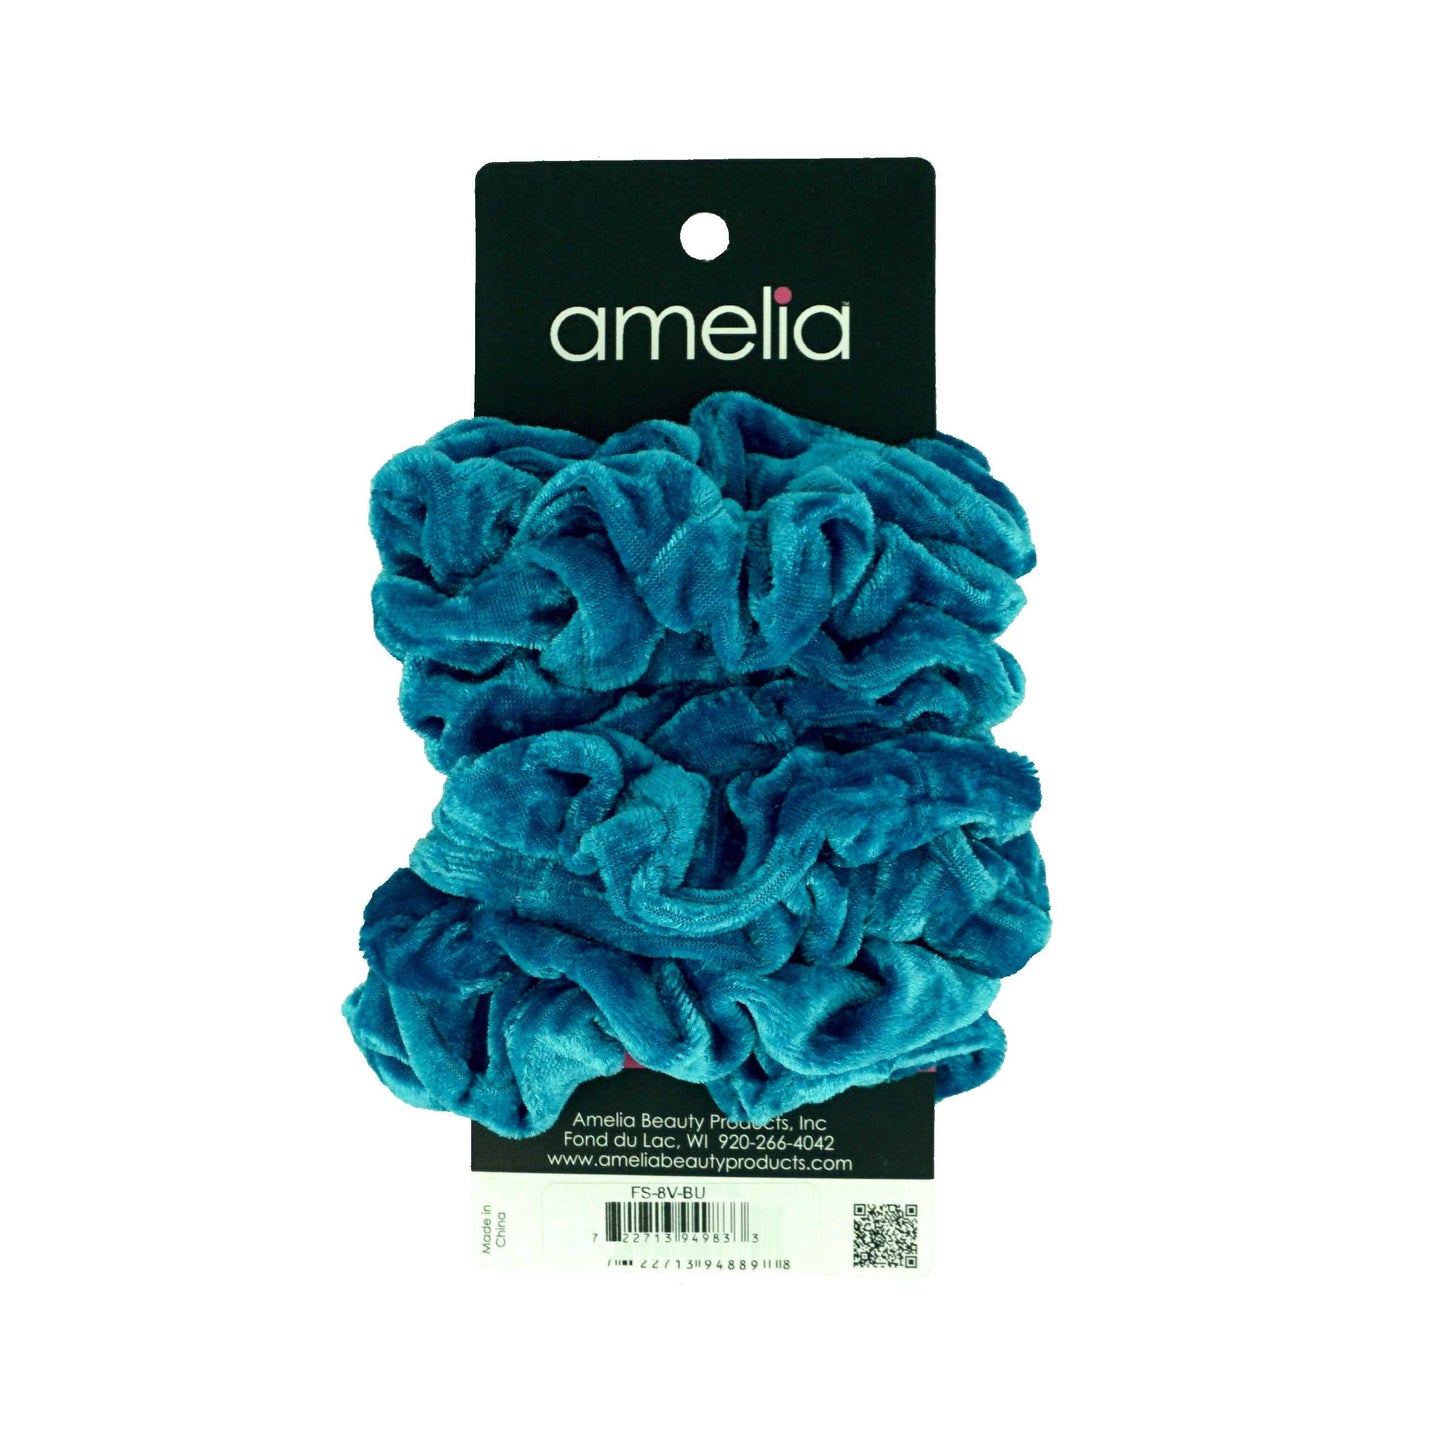 Amelia Beauty Products, Blue Velvet Velvet Scrunchies, 3.5in Diameter, Gentle on Hair, Strong Hold, No Snag, No Dents or Creases. 8 Pack - 12 Retail Packs